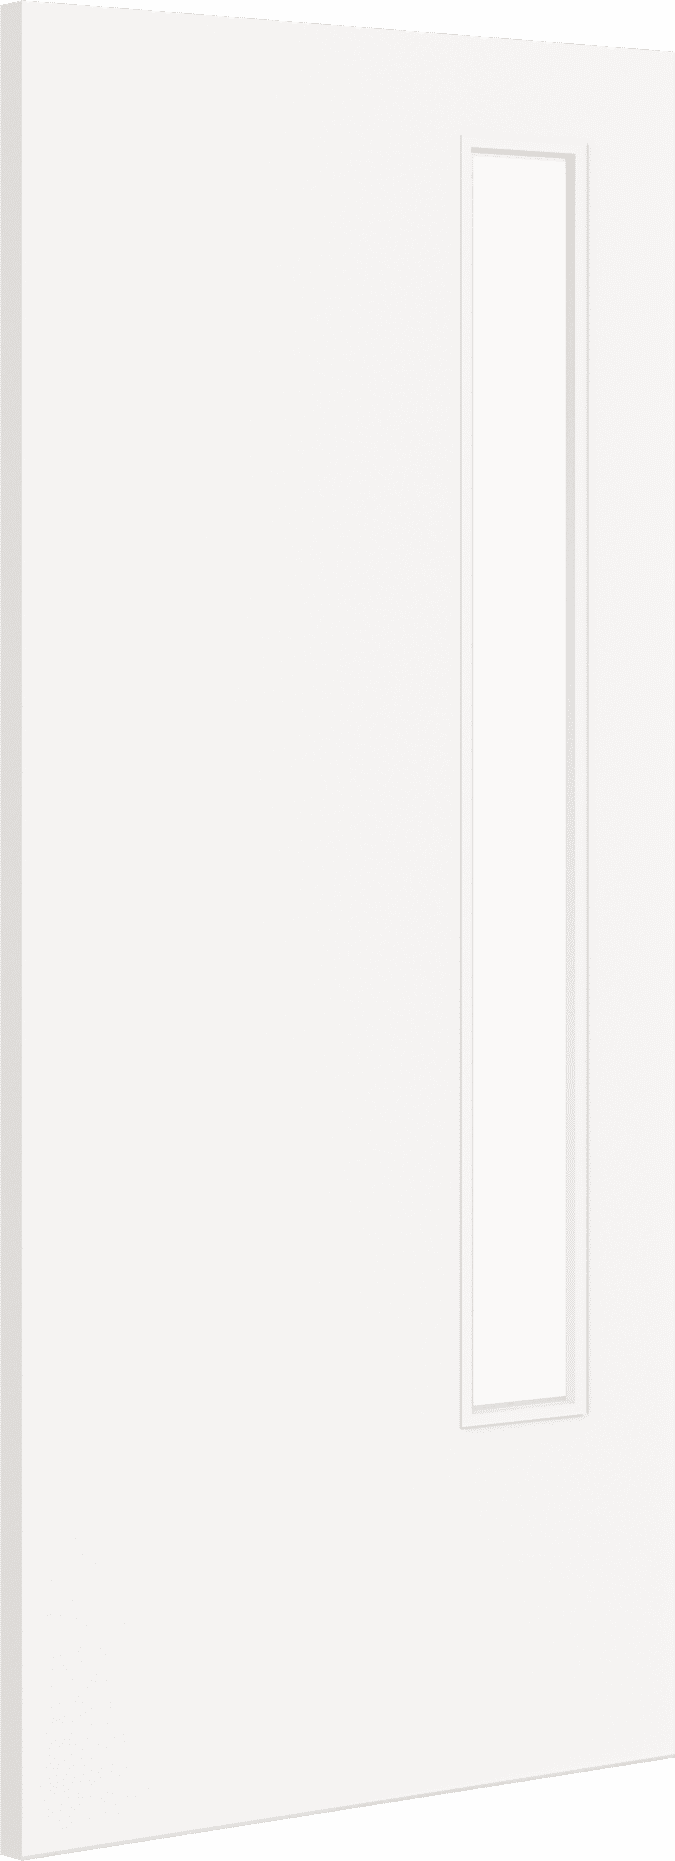 2040mm x 826mm x 44mm Architectural Paint Grade White 13 Clear Glazed Fire Door Blank